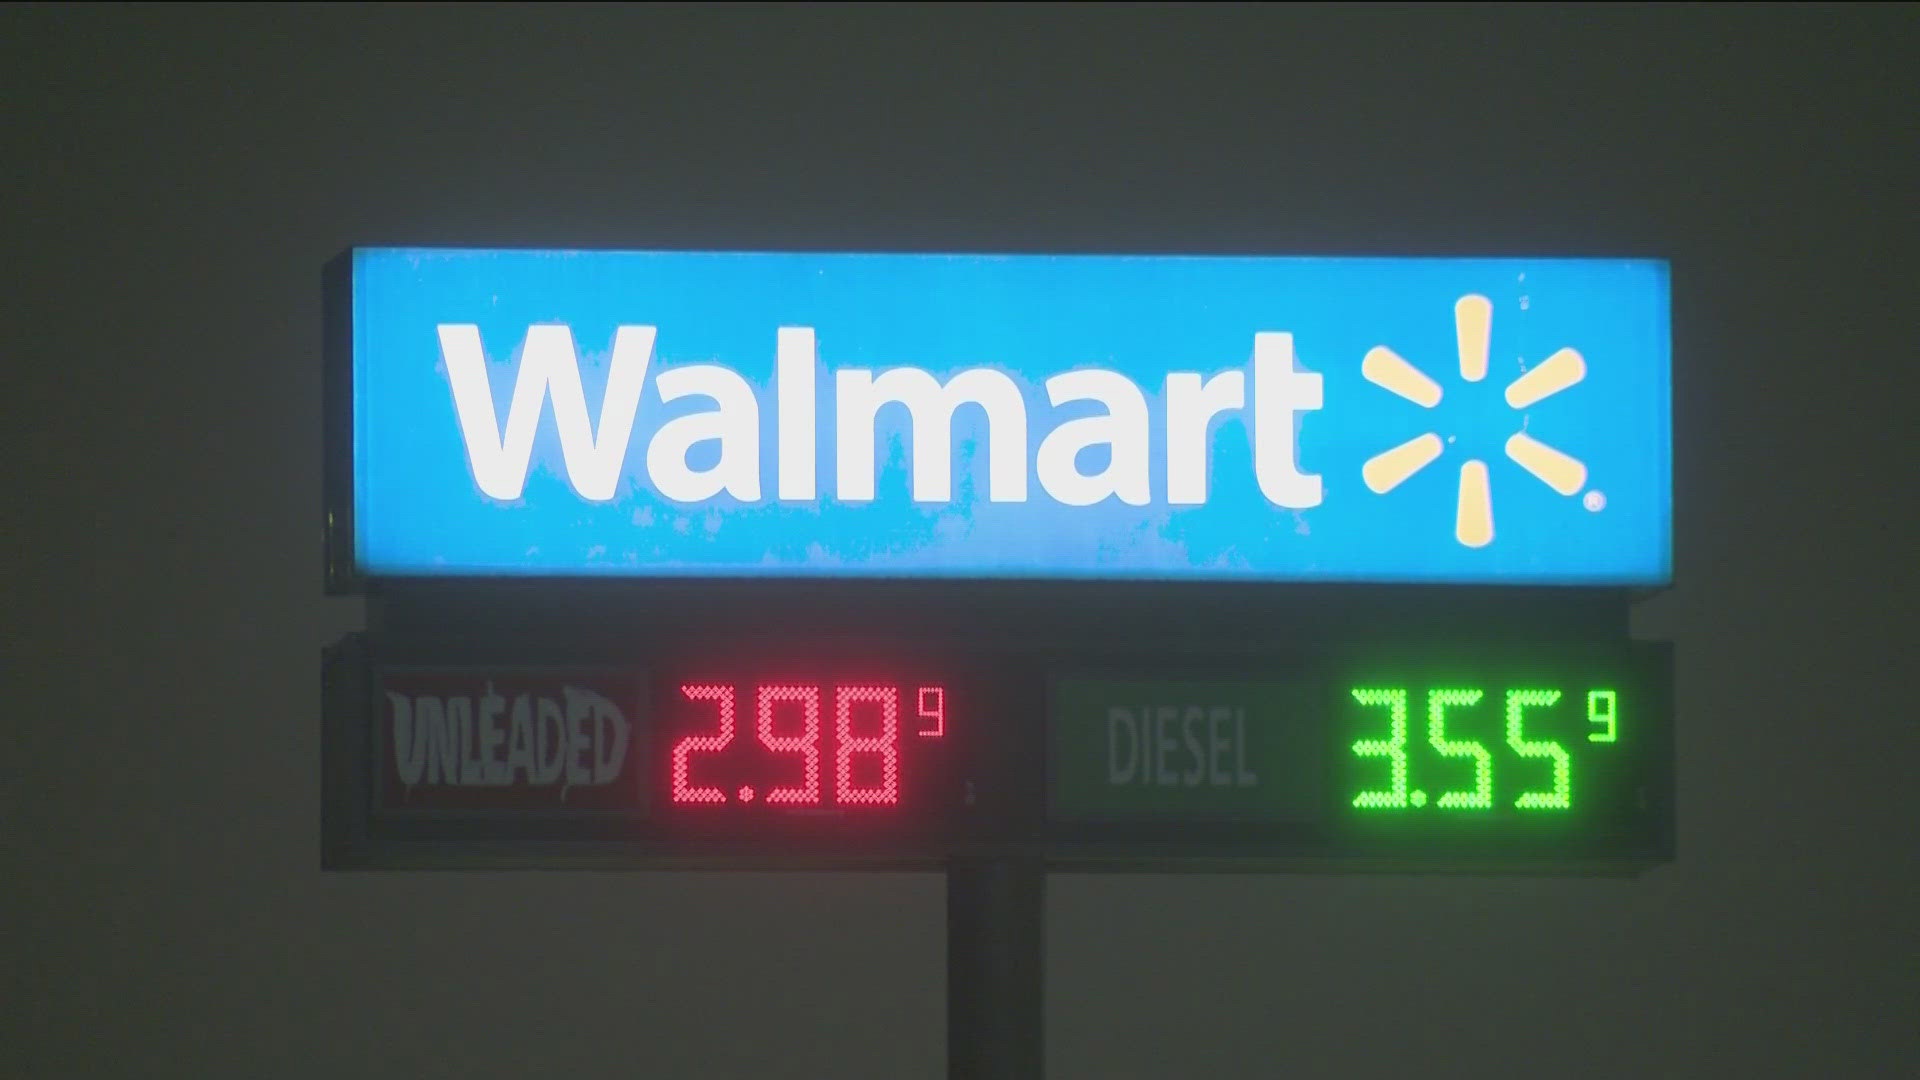 A suspect reportedly started a fire Sunday night inside a Walmart gas station, according to law enforcement officials.